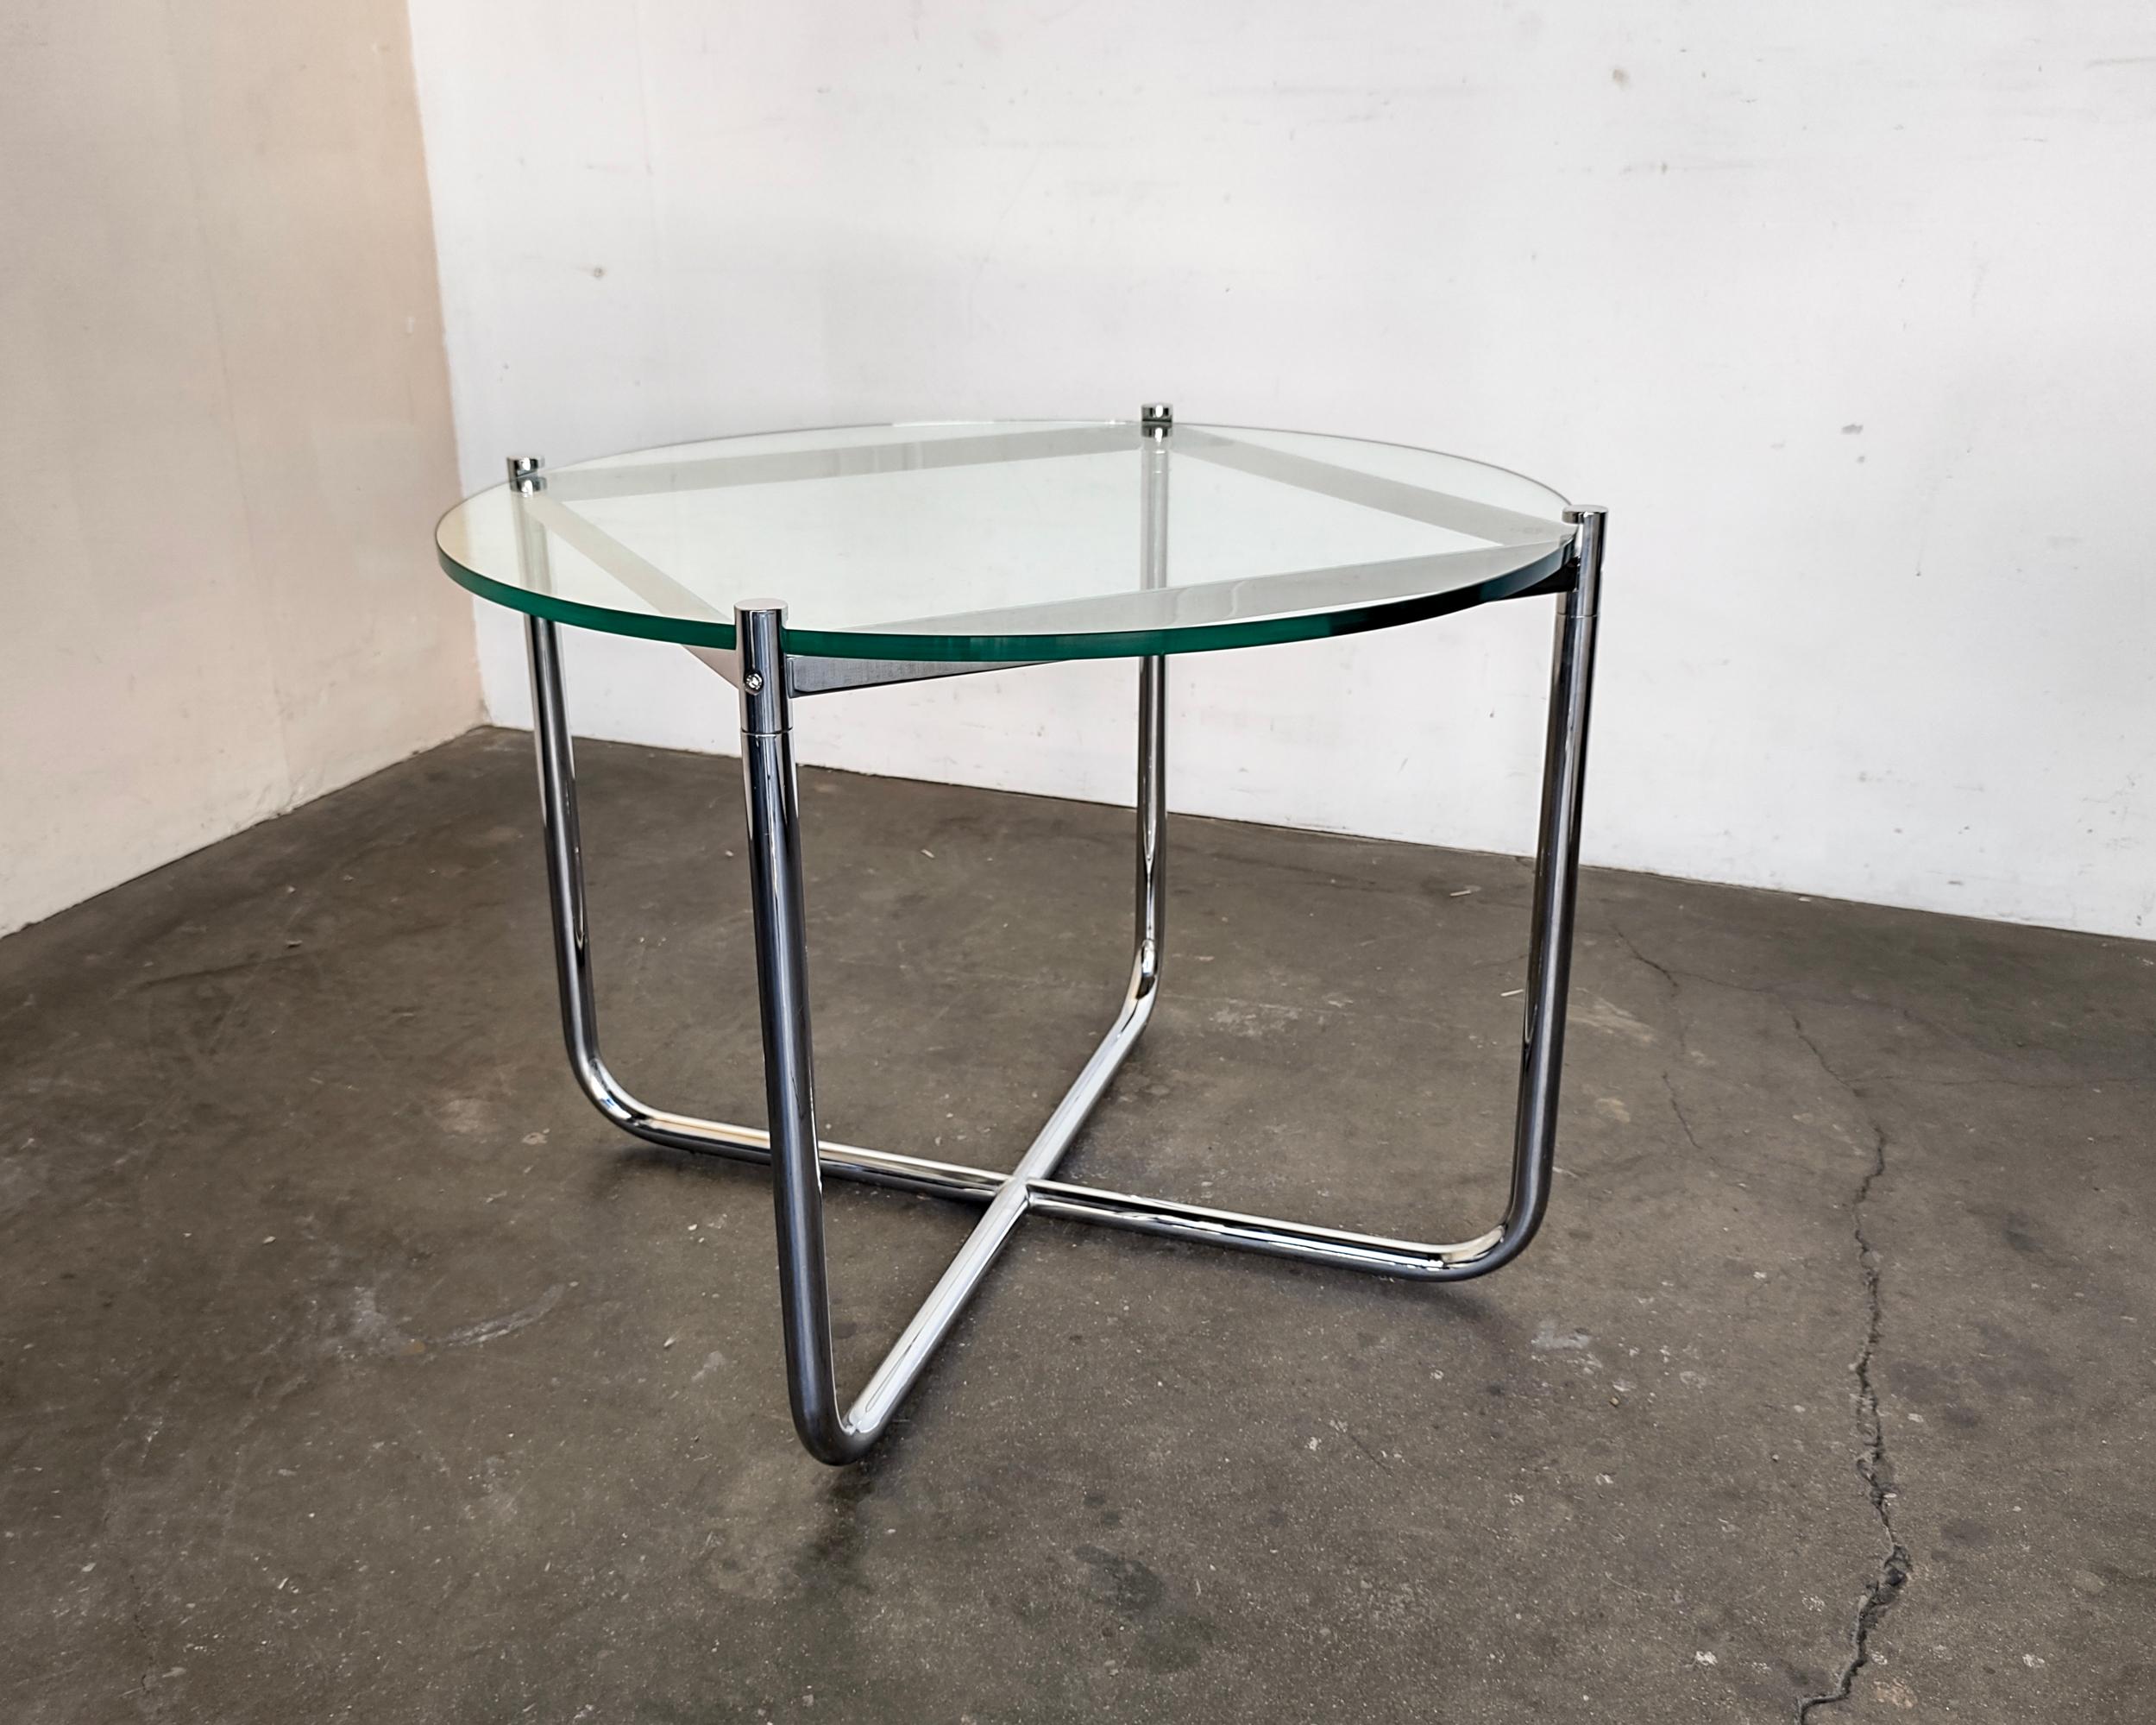 MR Table designed by Mies Van Der Rohe executes his iconic bent tubular chrome frame combined with thick glass top. Originally designed for the Tugendhat House in 1927. This example was produced by Knoll in the 1970s. Overall excellent condition,